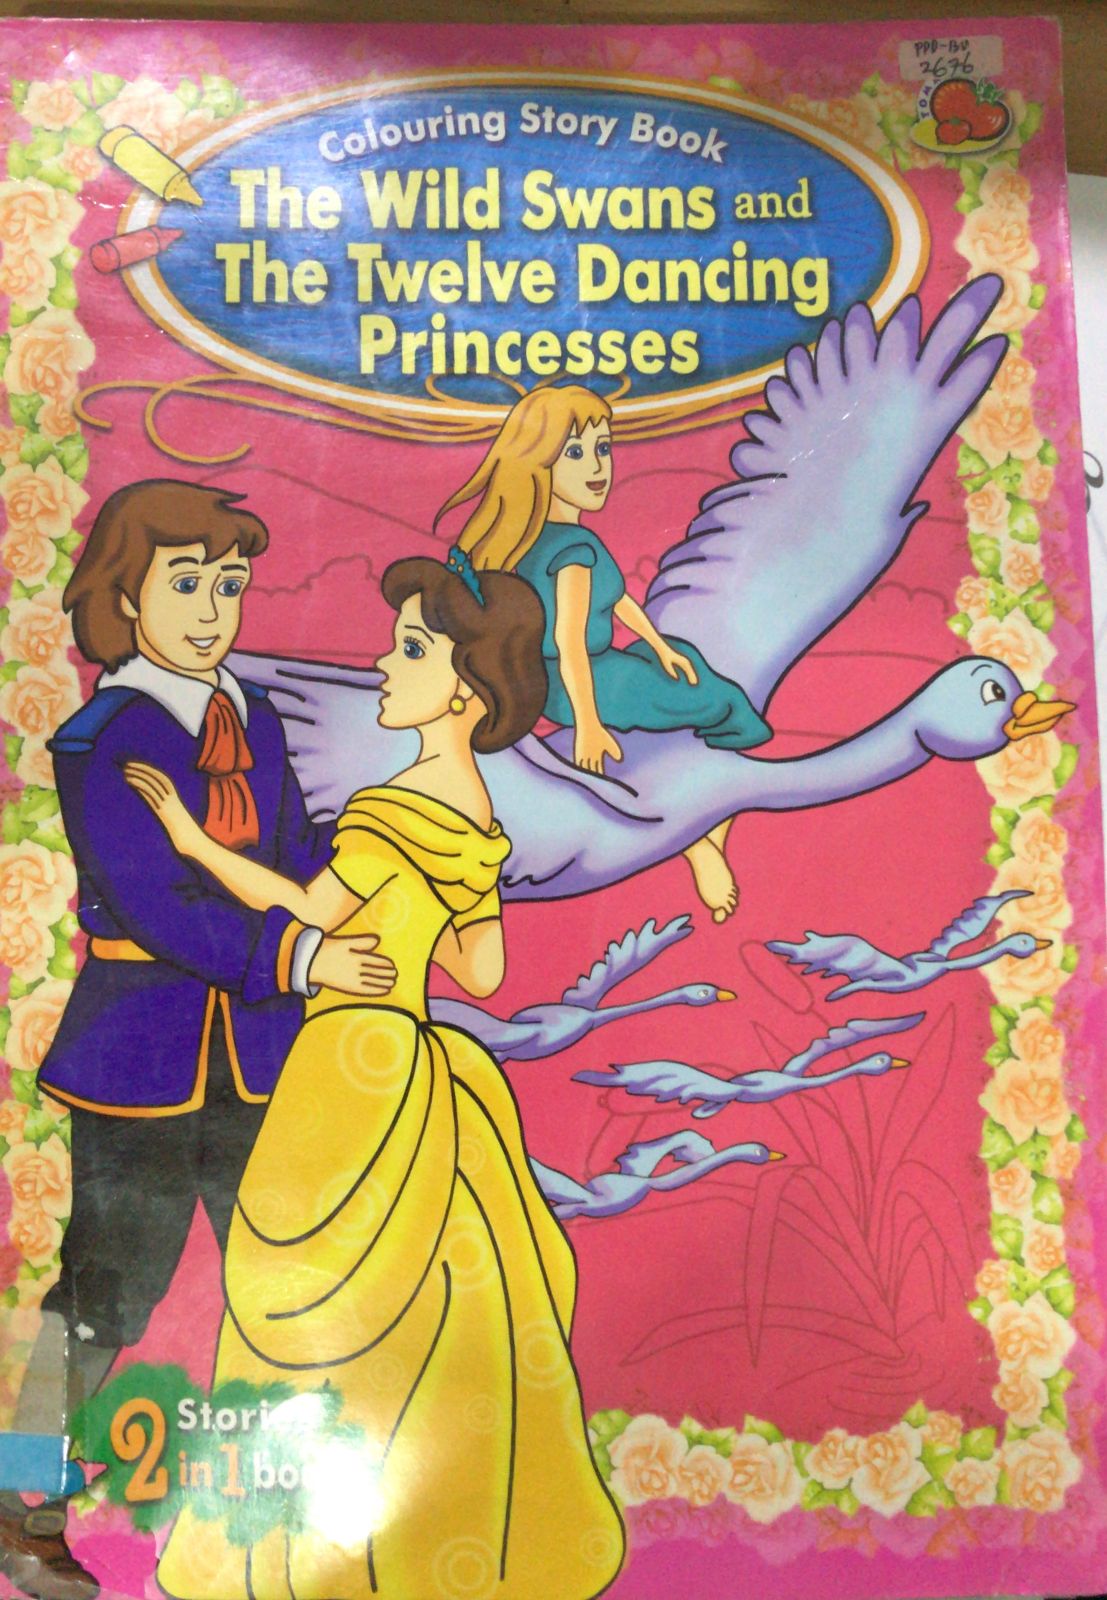 The Wild Swans and The Twelve Dancing Princesses